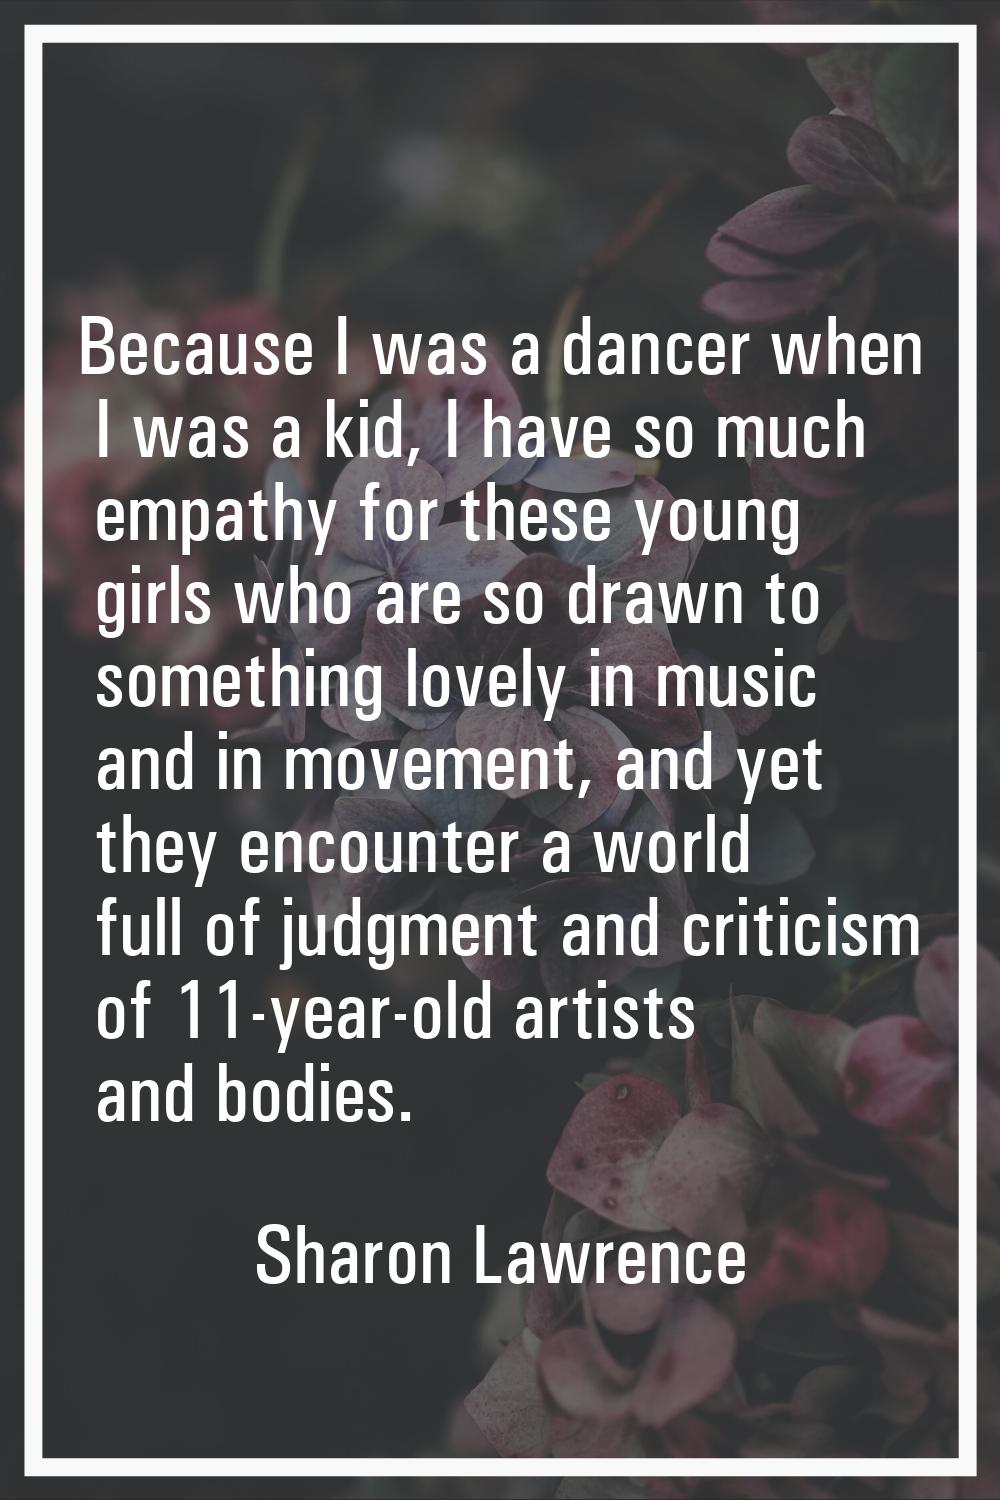 Because I was a dancer when I was a kid, I have so much empathy for these young girls who are so dr